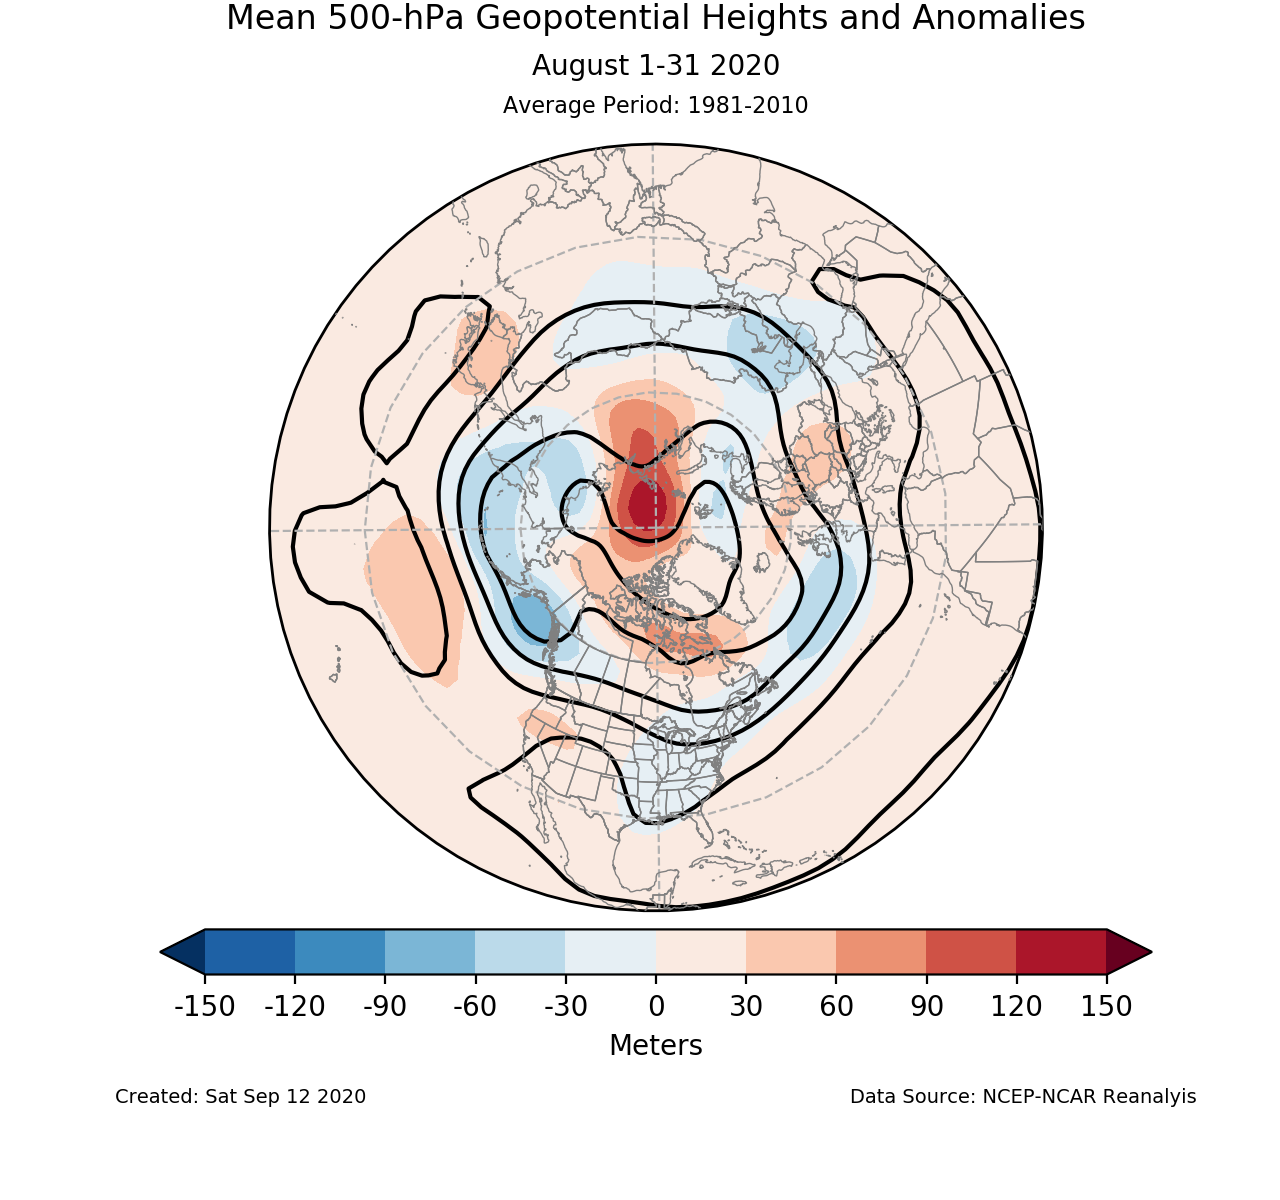 500-mb height mean (contours) and anomalies (shading) for the Northern Hemisphere for August 2020